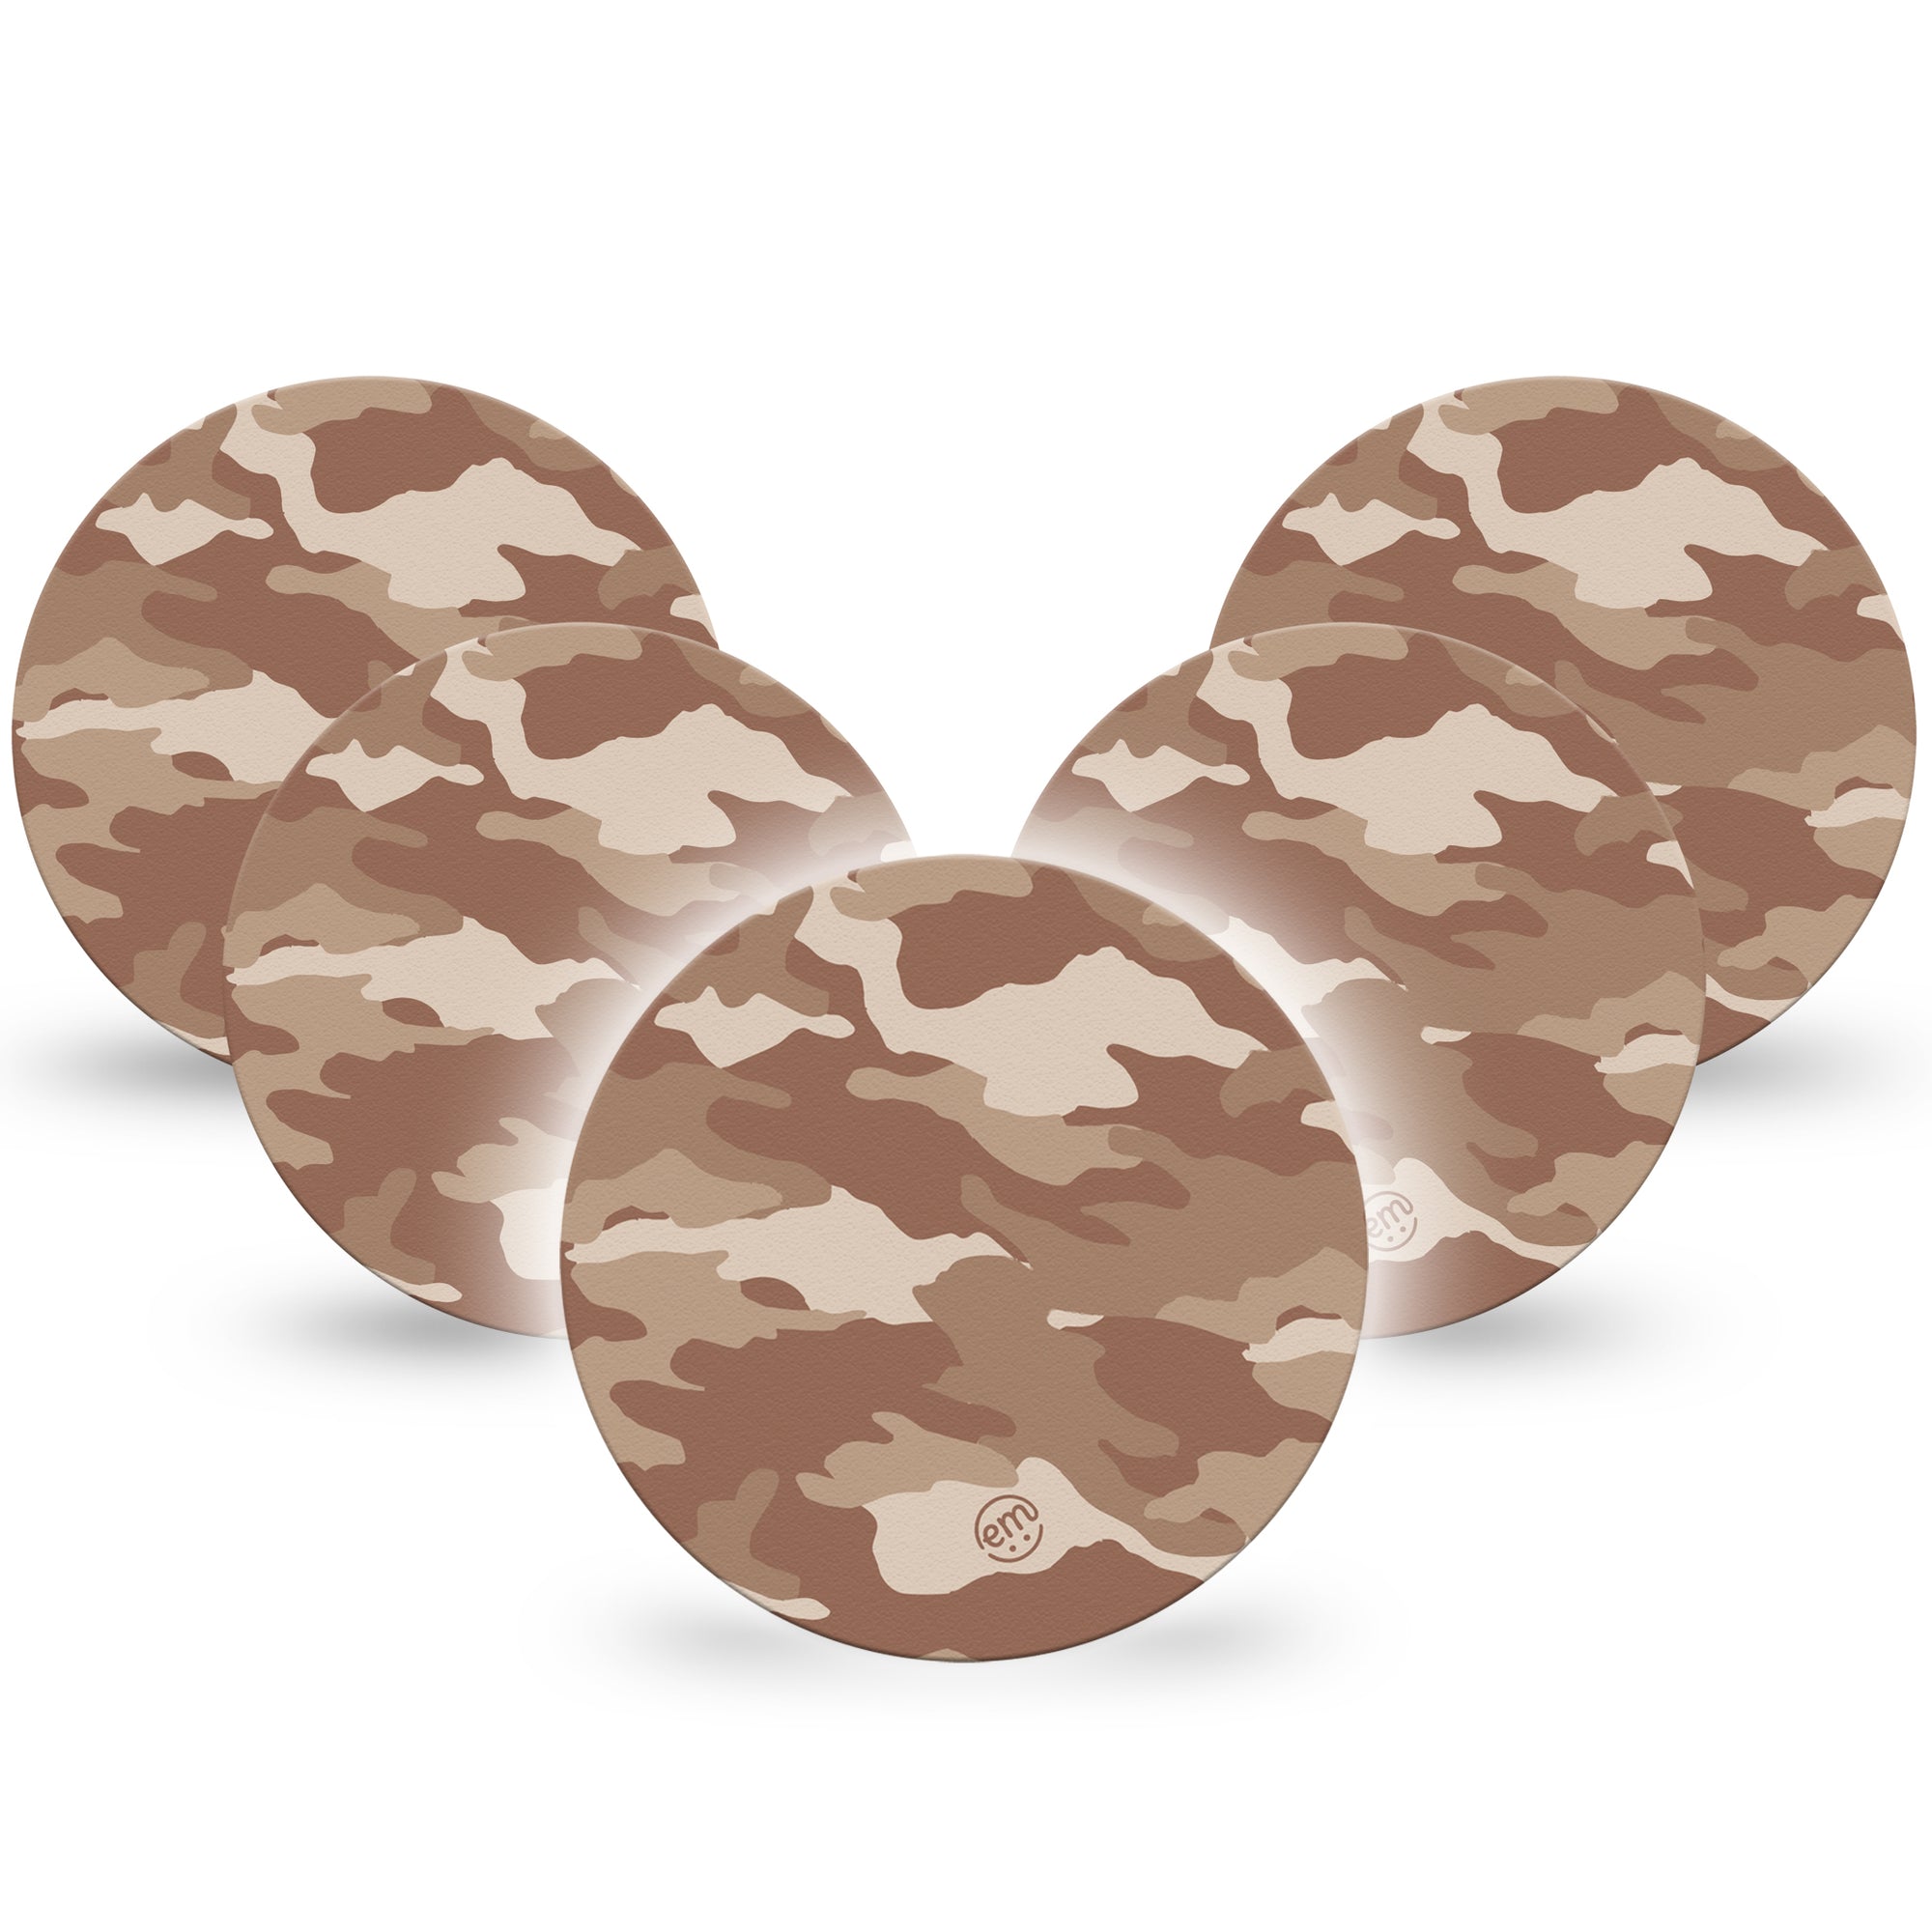 ExpressionMed Desert Camo Libre Overpatch Tapes